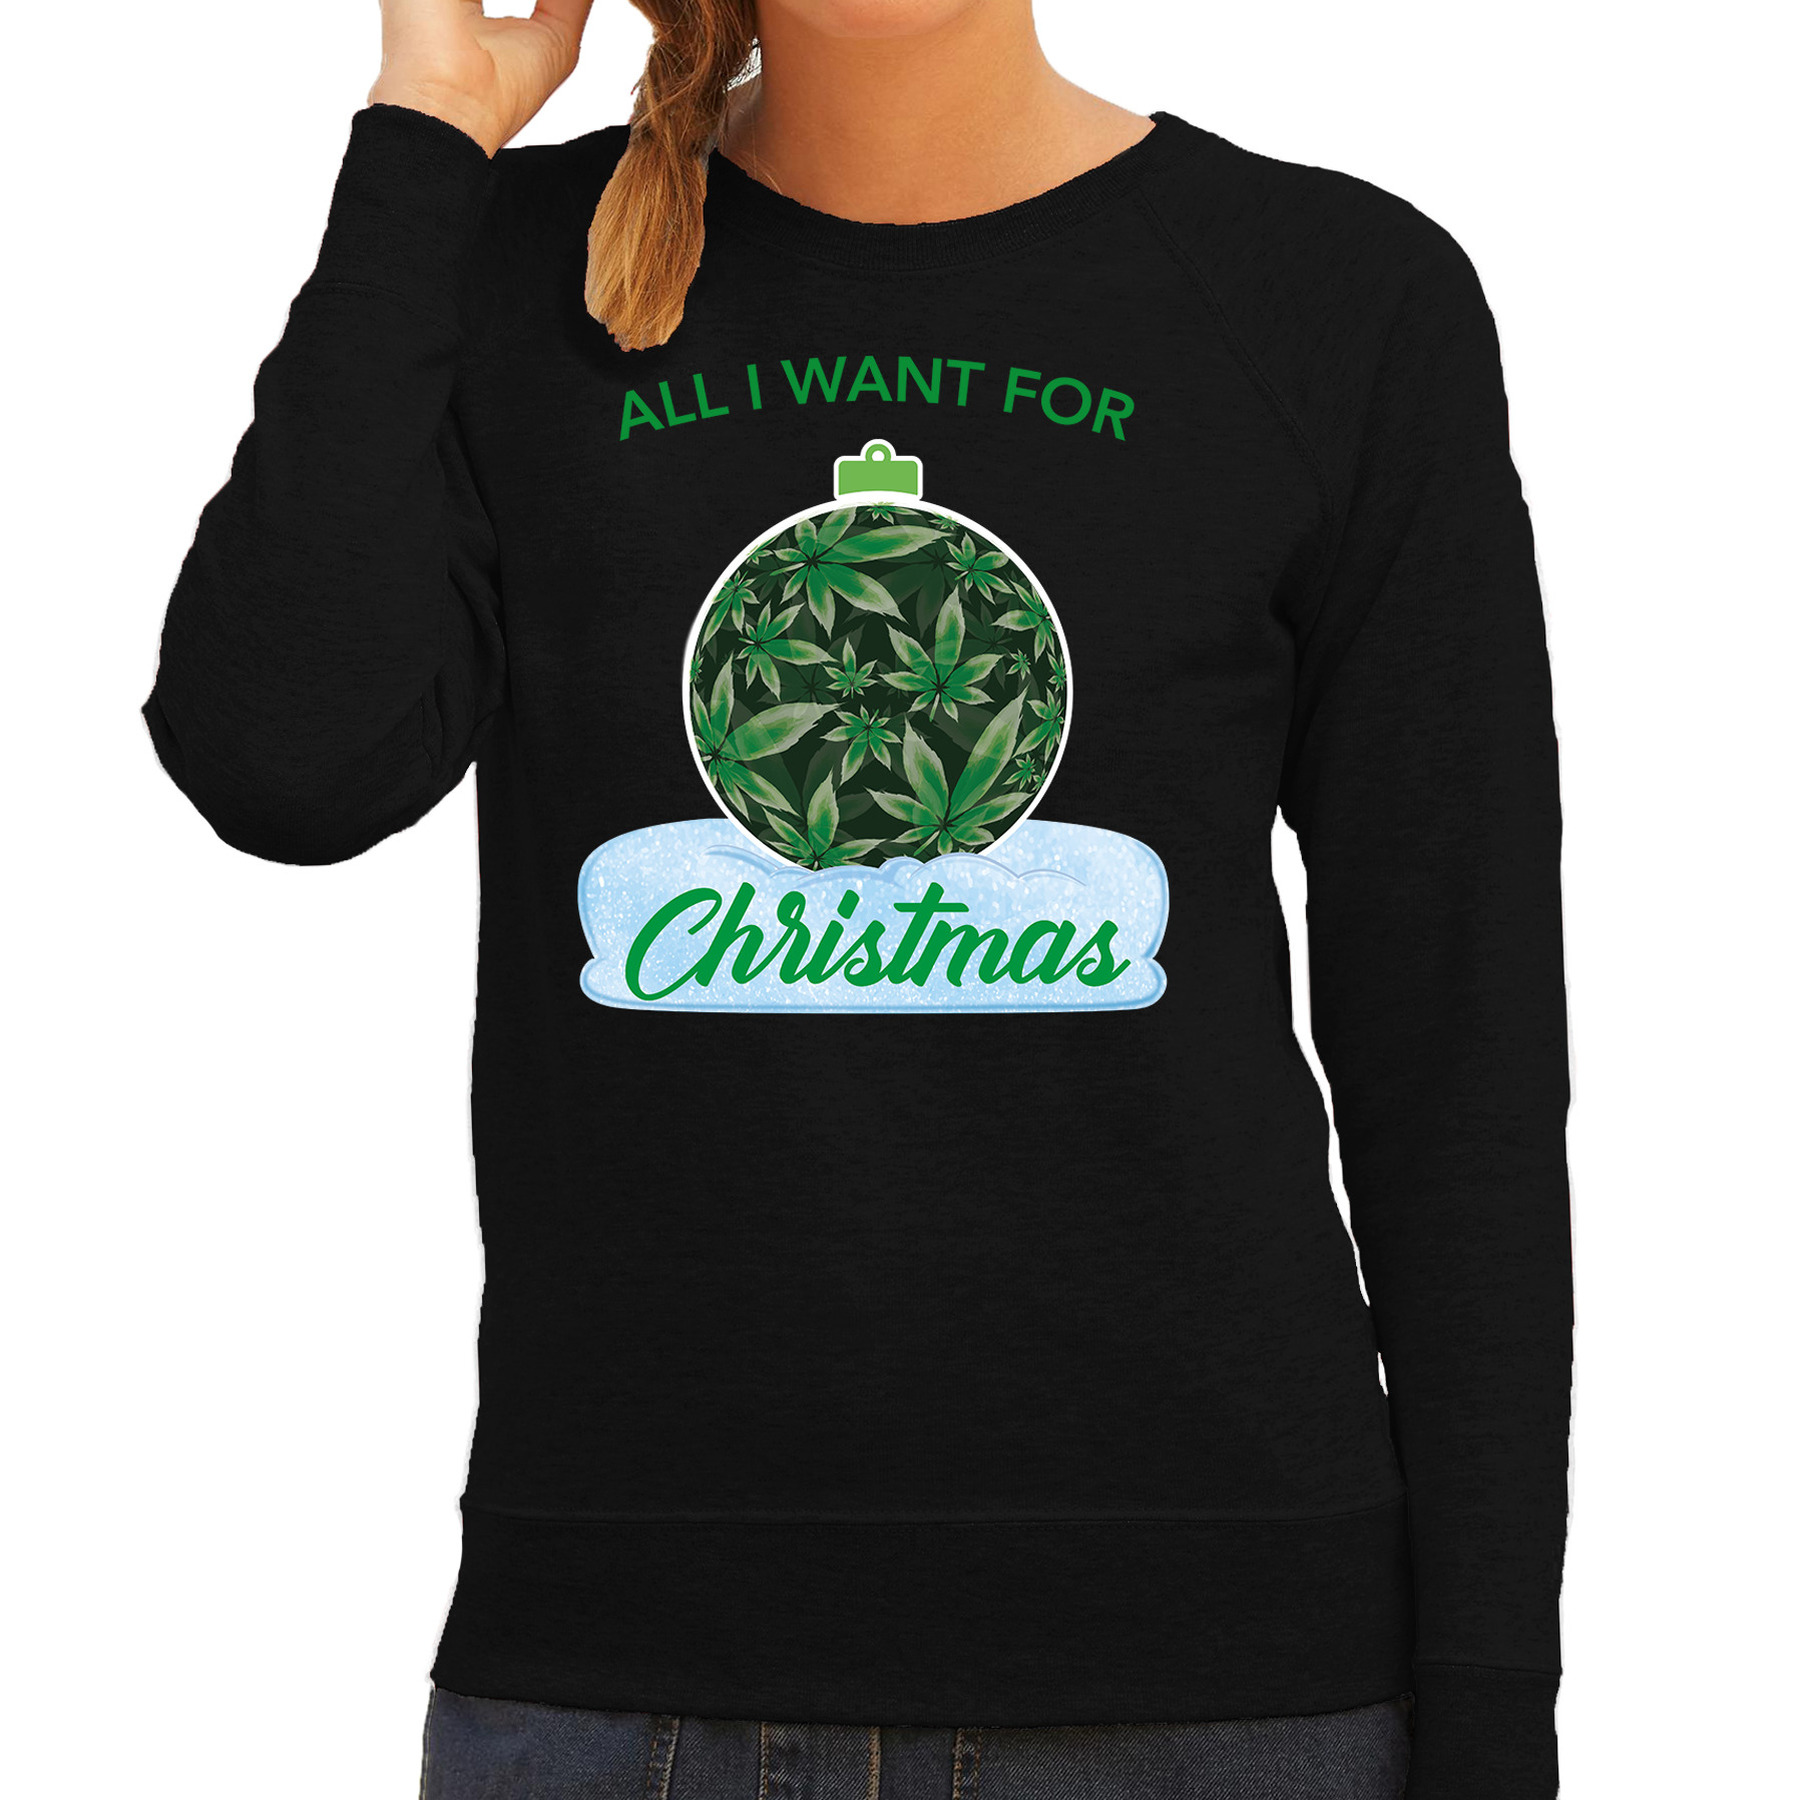 Wiet Kerstbal sweater-outfit All i want for Christmas zwart voor dames